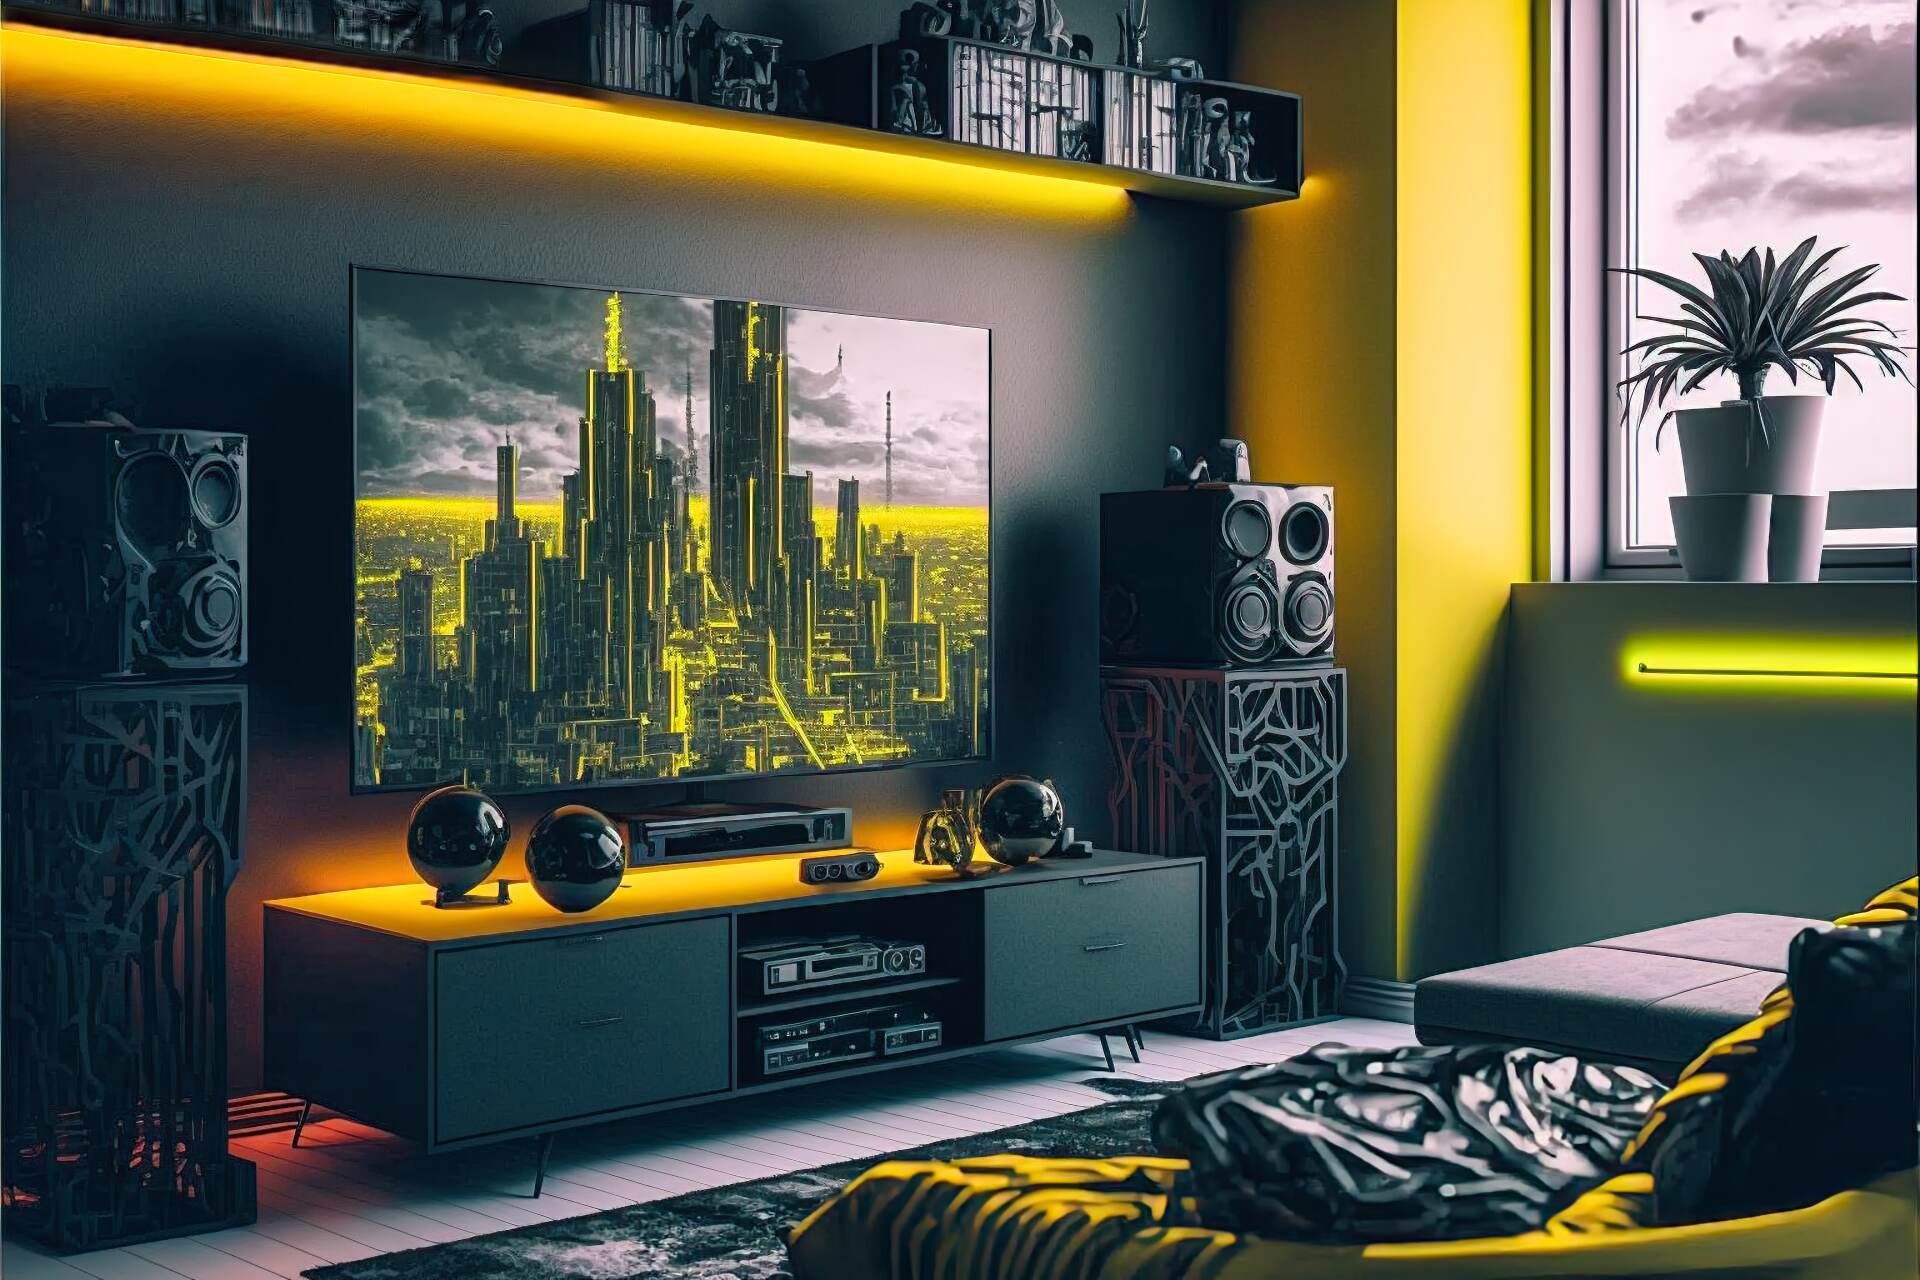 A Cyberpunk-Style Living Room With A Neon Cyber City Vibe. The Walls Are Painted Black And Adorned With Neon Lights In Various Shades Of Yellow. The Furniture Is Made Up Of Sleek And Modern Pieces In A Monochromatic Color Scheme Of Black And White. A Large Flat Screen Tv Is Mounted On The Wall, Surrounded By More Neon Lights. A High-Tech Sound System And A Virtual Reality Gaming Console Complete The Look.